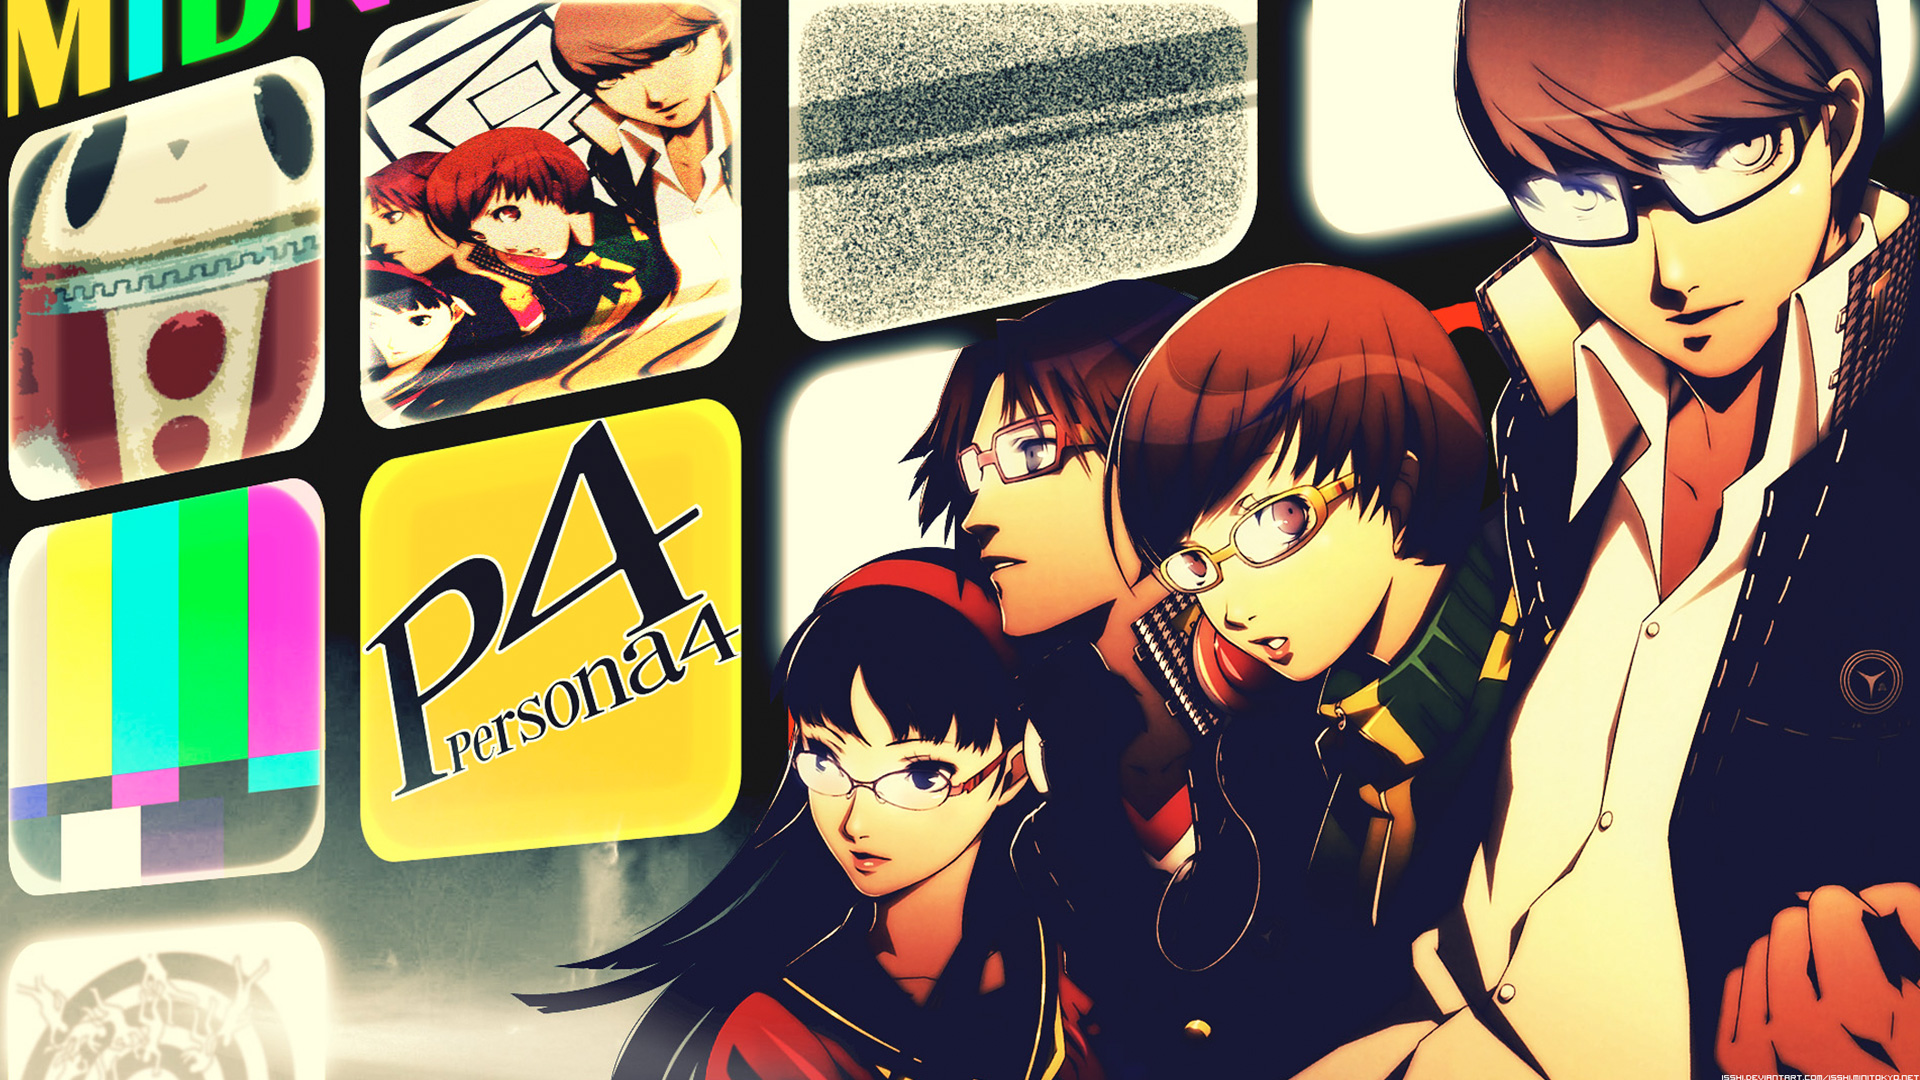 Free Download Persona 4 Golden Wallpaper Hd Wwwgalleryhipcom The 19x1080 For Your Desktop Mobile Tablet Explore 75 Persona Wallpaper Persona 4 Hd Wallpaper Persona 5 Hd Wallpaper Persona 4 Golden Wallpaper